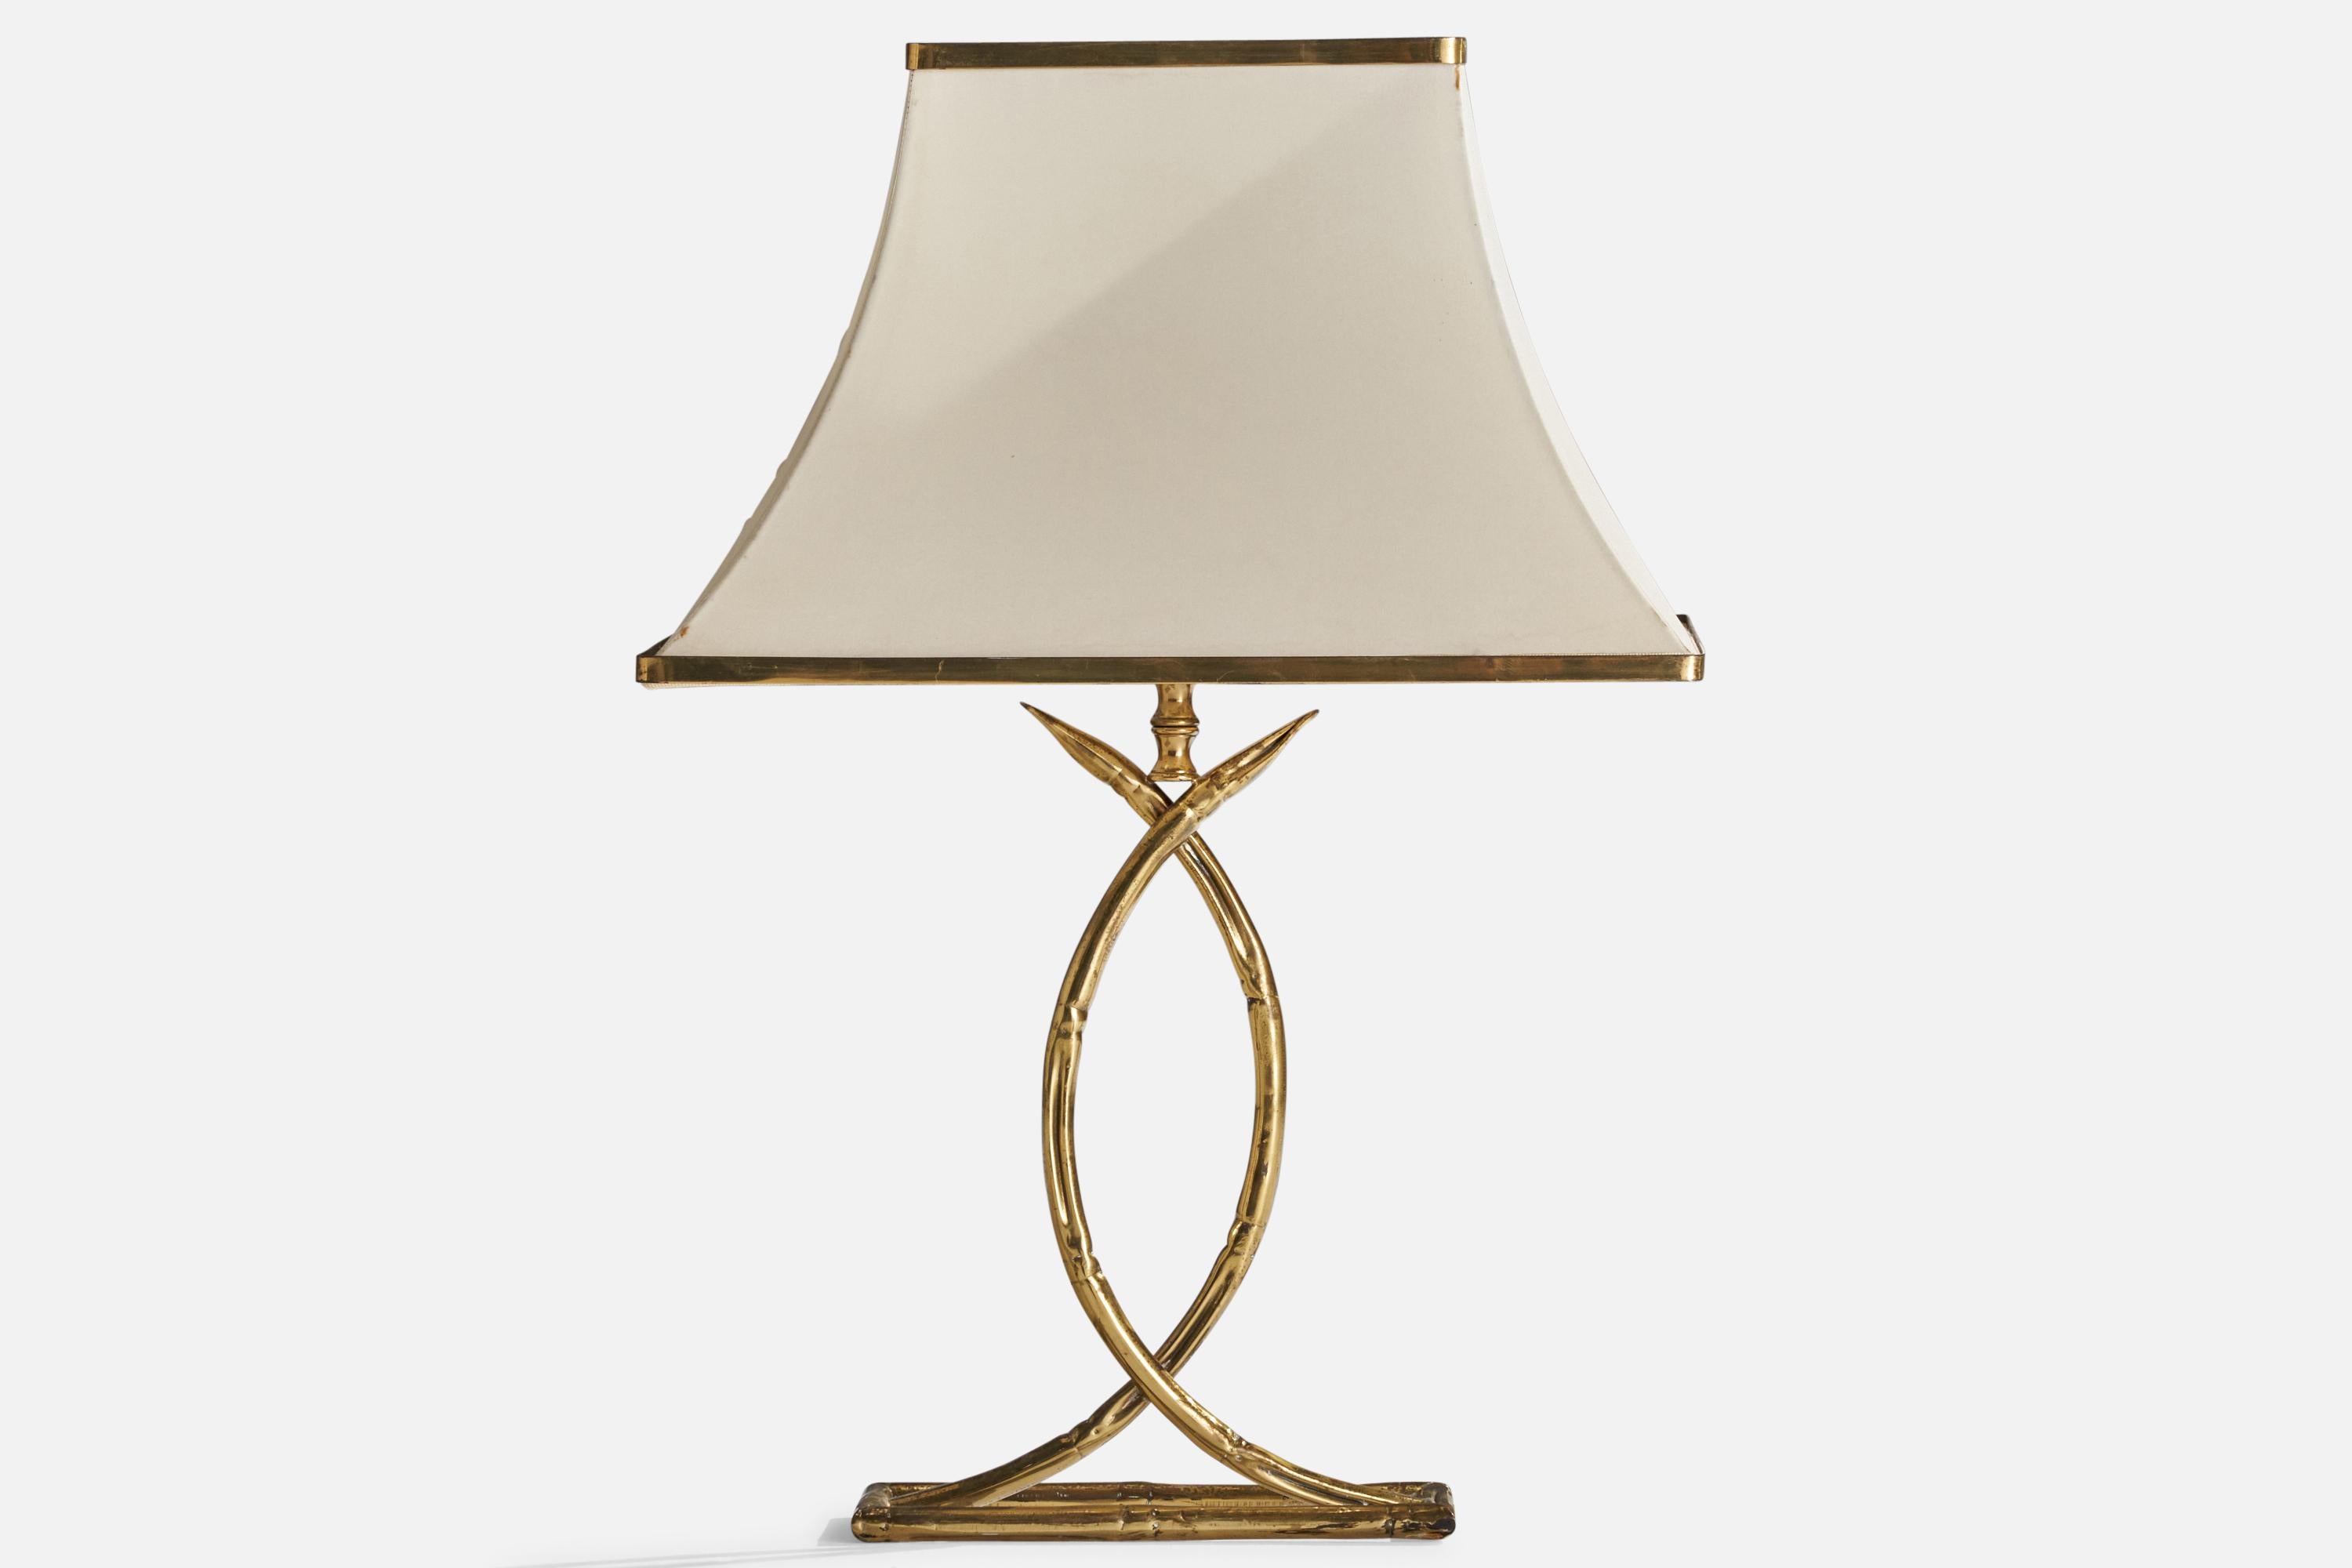 A brass and off-white fabric table lamp designed and produced in Italy, 1970s.

Overall Dimensions (inches): 22” H x 15” W x 9.25” D
Stated dimensions include shade.
Bulb Specifications: E-26 Bulb
Number of Sockets: 1
All lighting will be converted